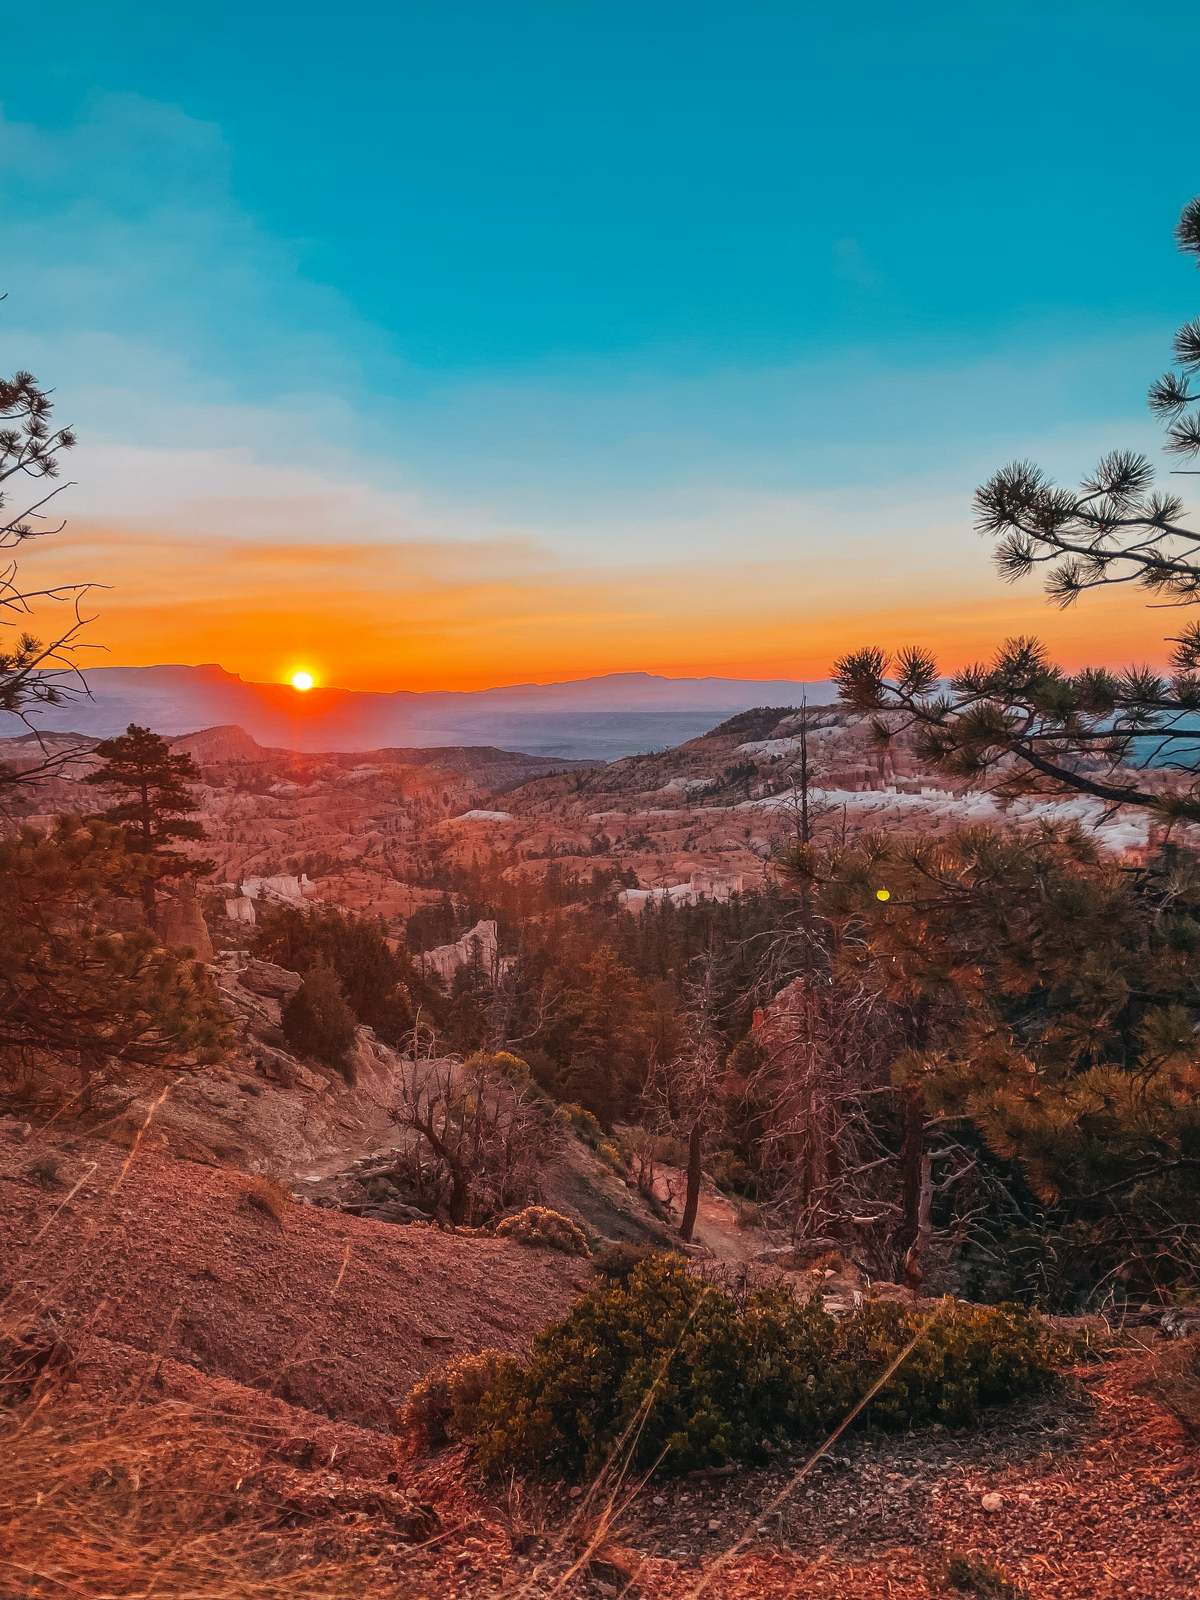 Sunrise at Sunrise Point in Bryce Canyon National Park in Utah